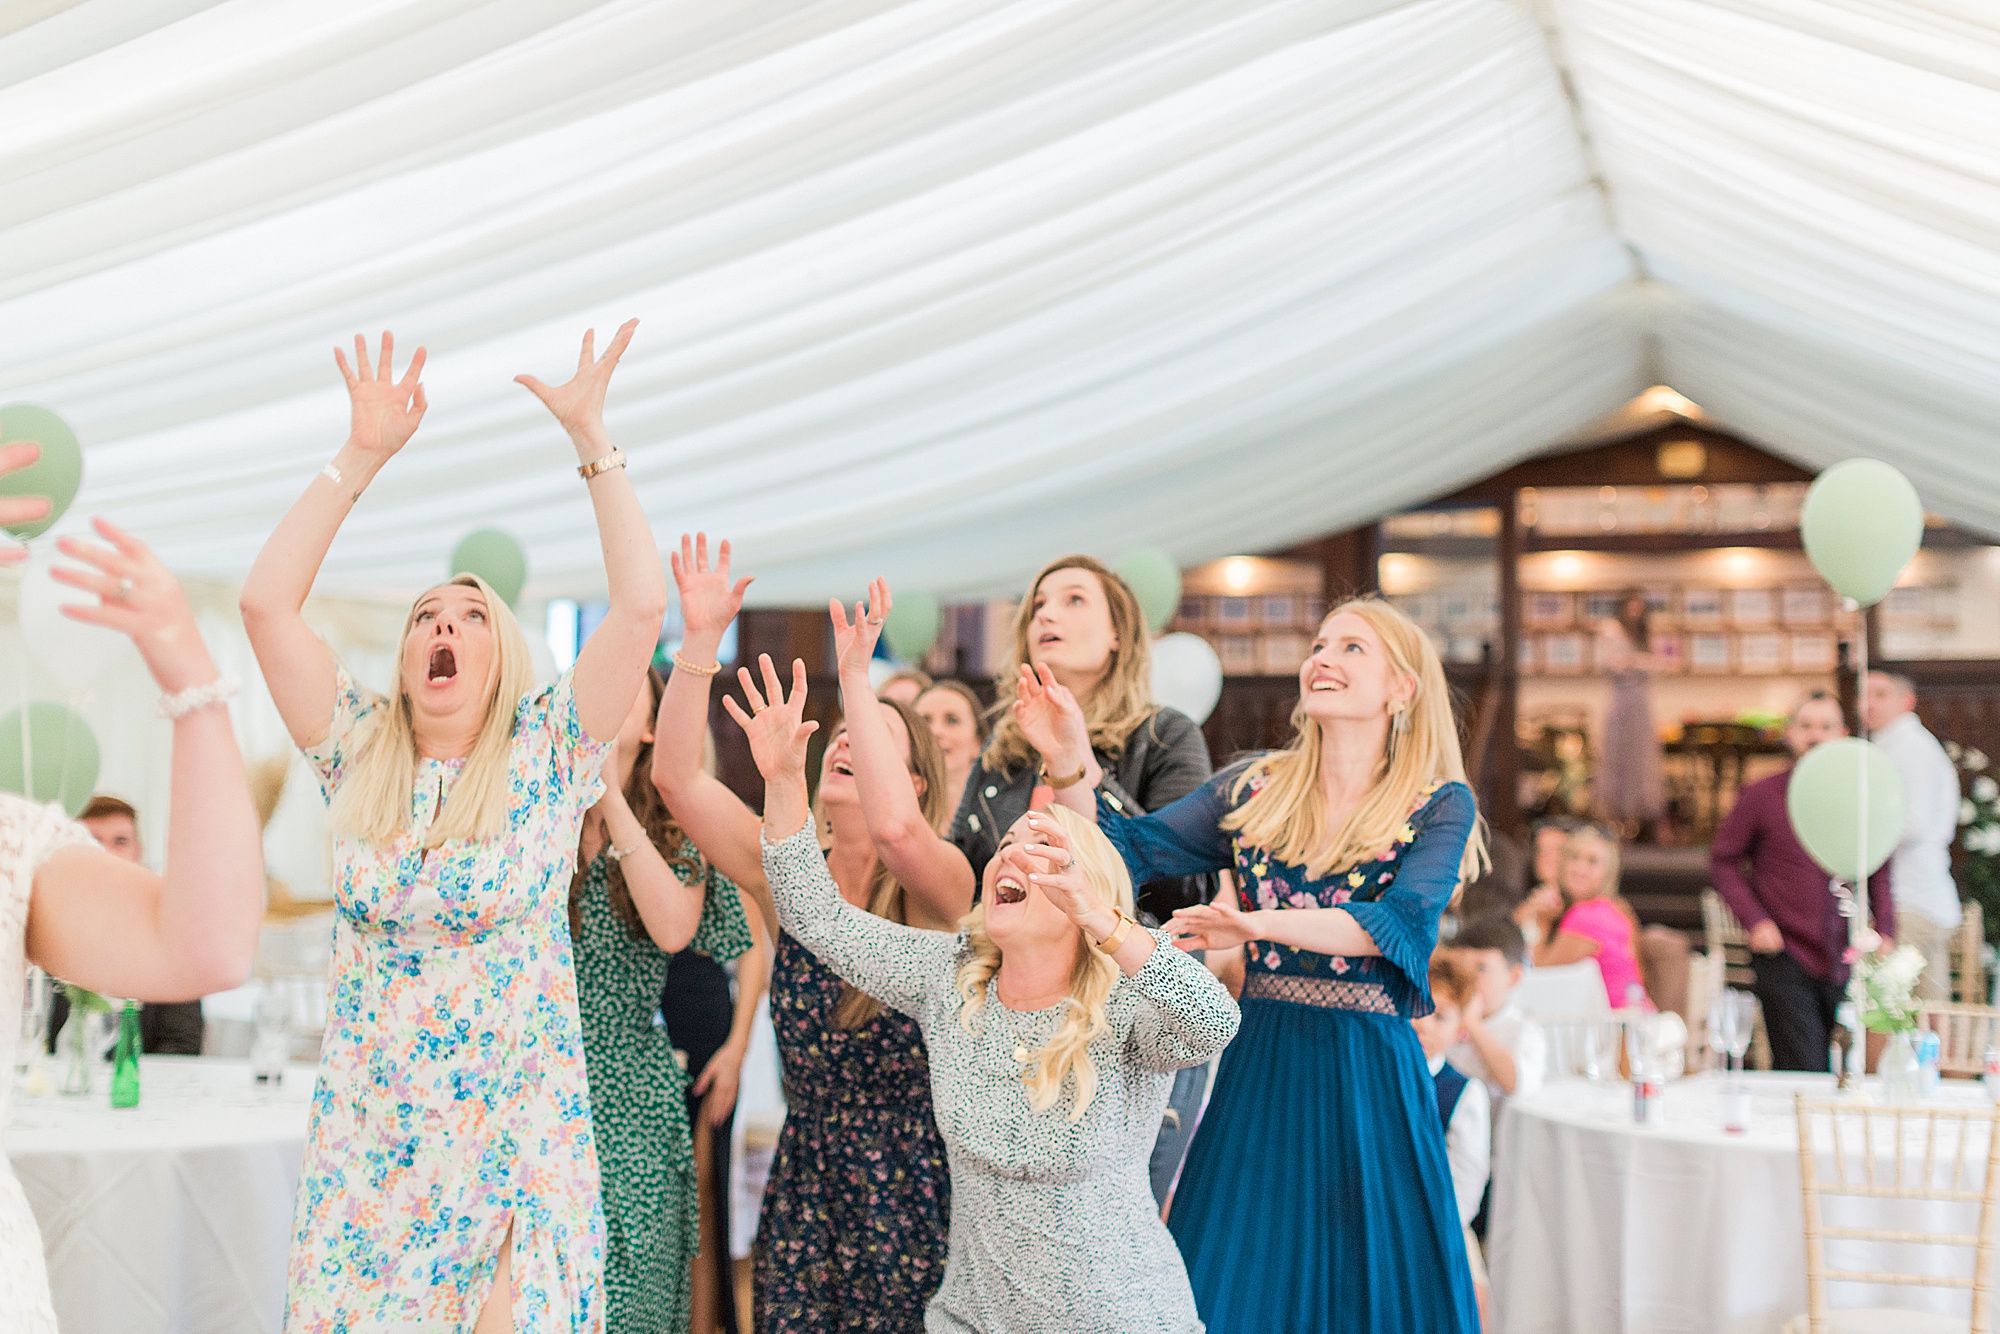 photo shows a group of female wedding guests all rushing with their arms out ready and poised to catch the bride's bouquet that has been thrown